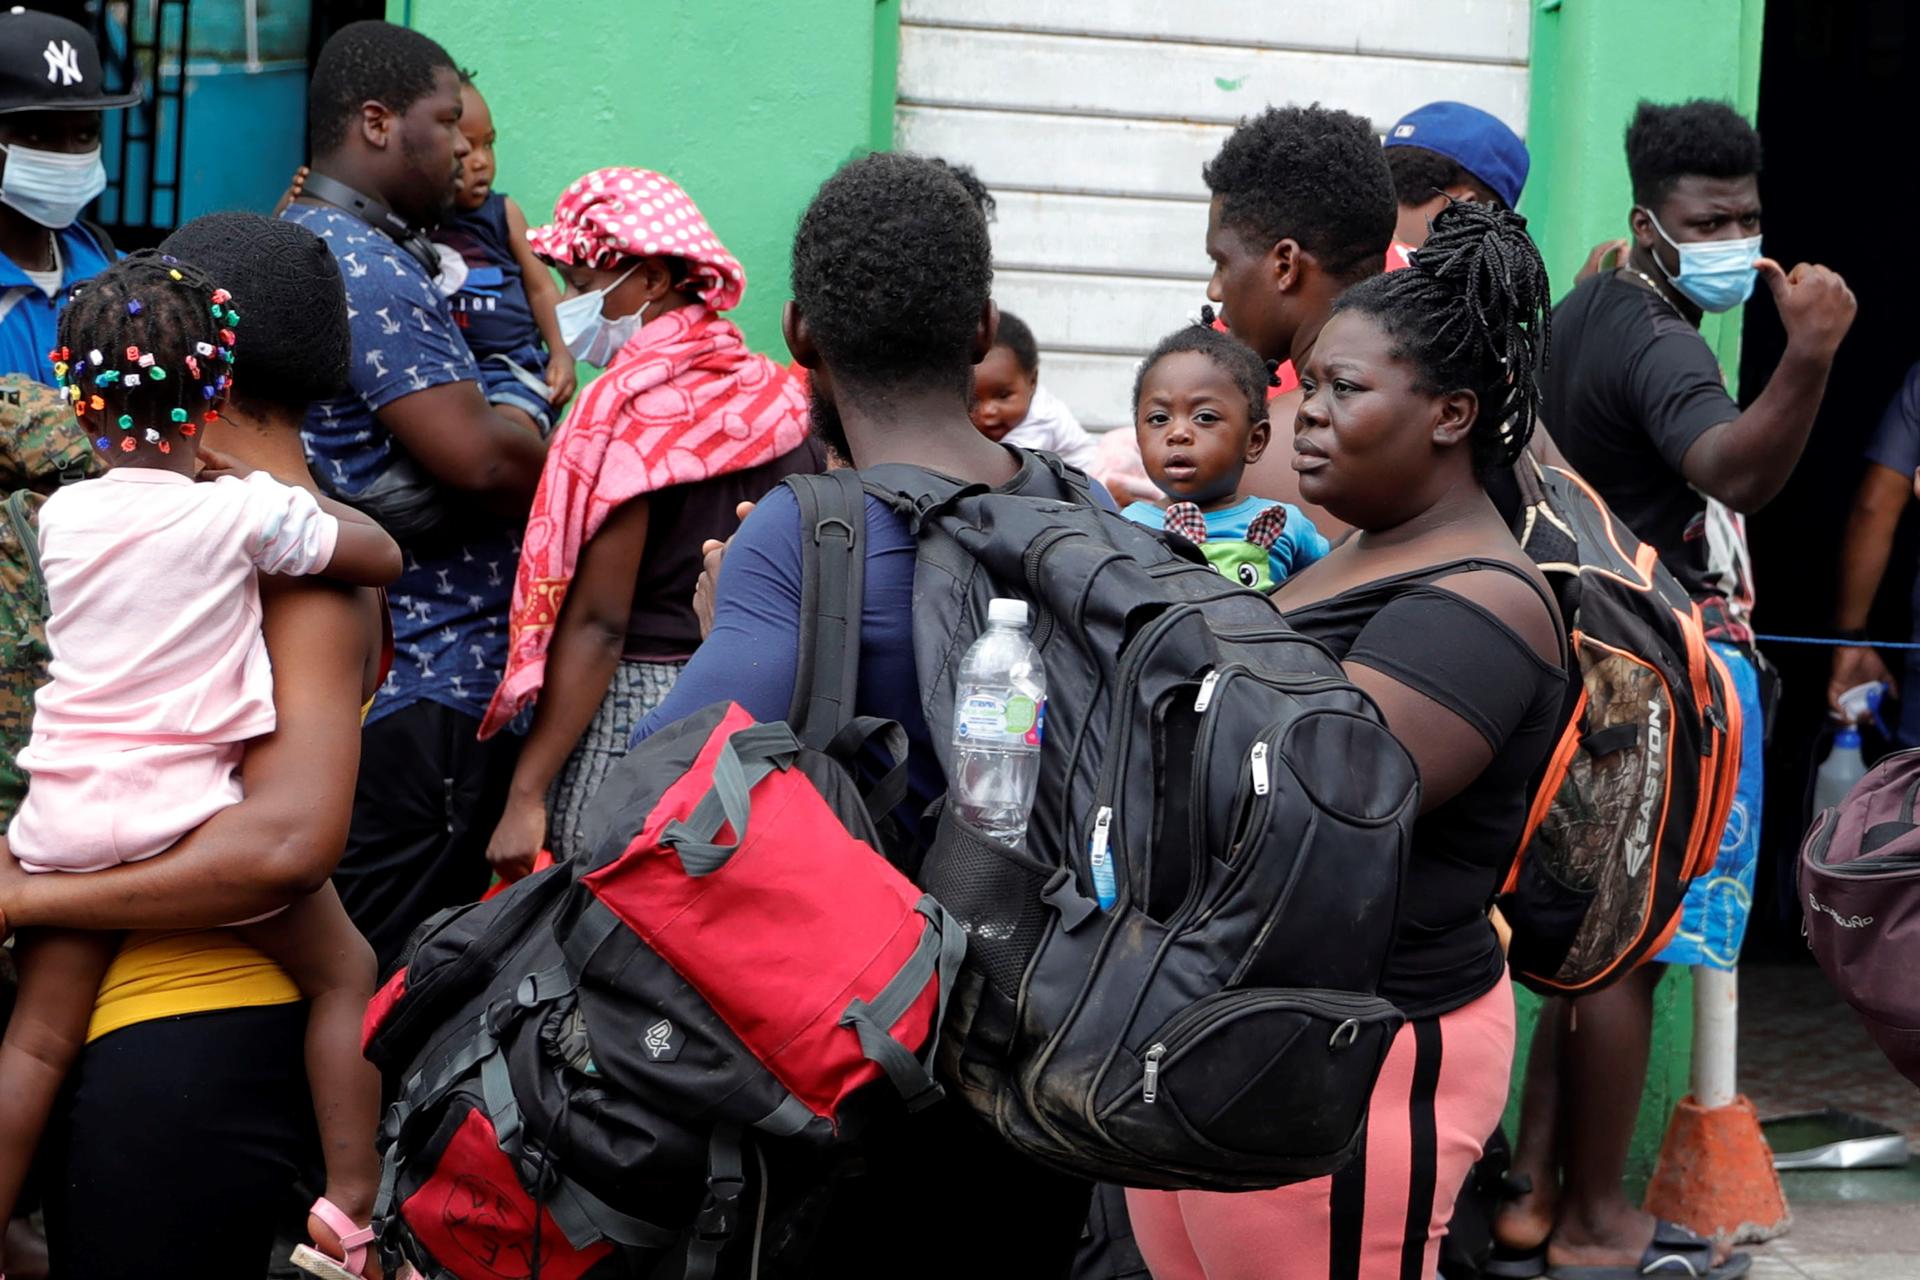 (FILE) Photo dated October 25, 2021 shows Haitian migrants waiting for intercity transportation in the city of Tegucigalpa, Honduras.EFE/ Gustavo Amador